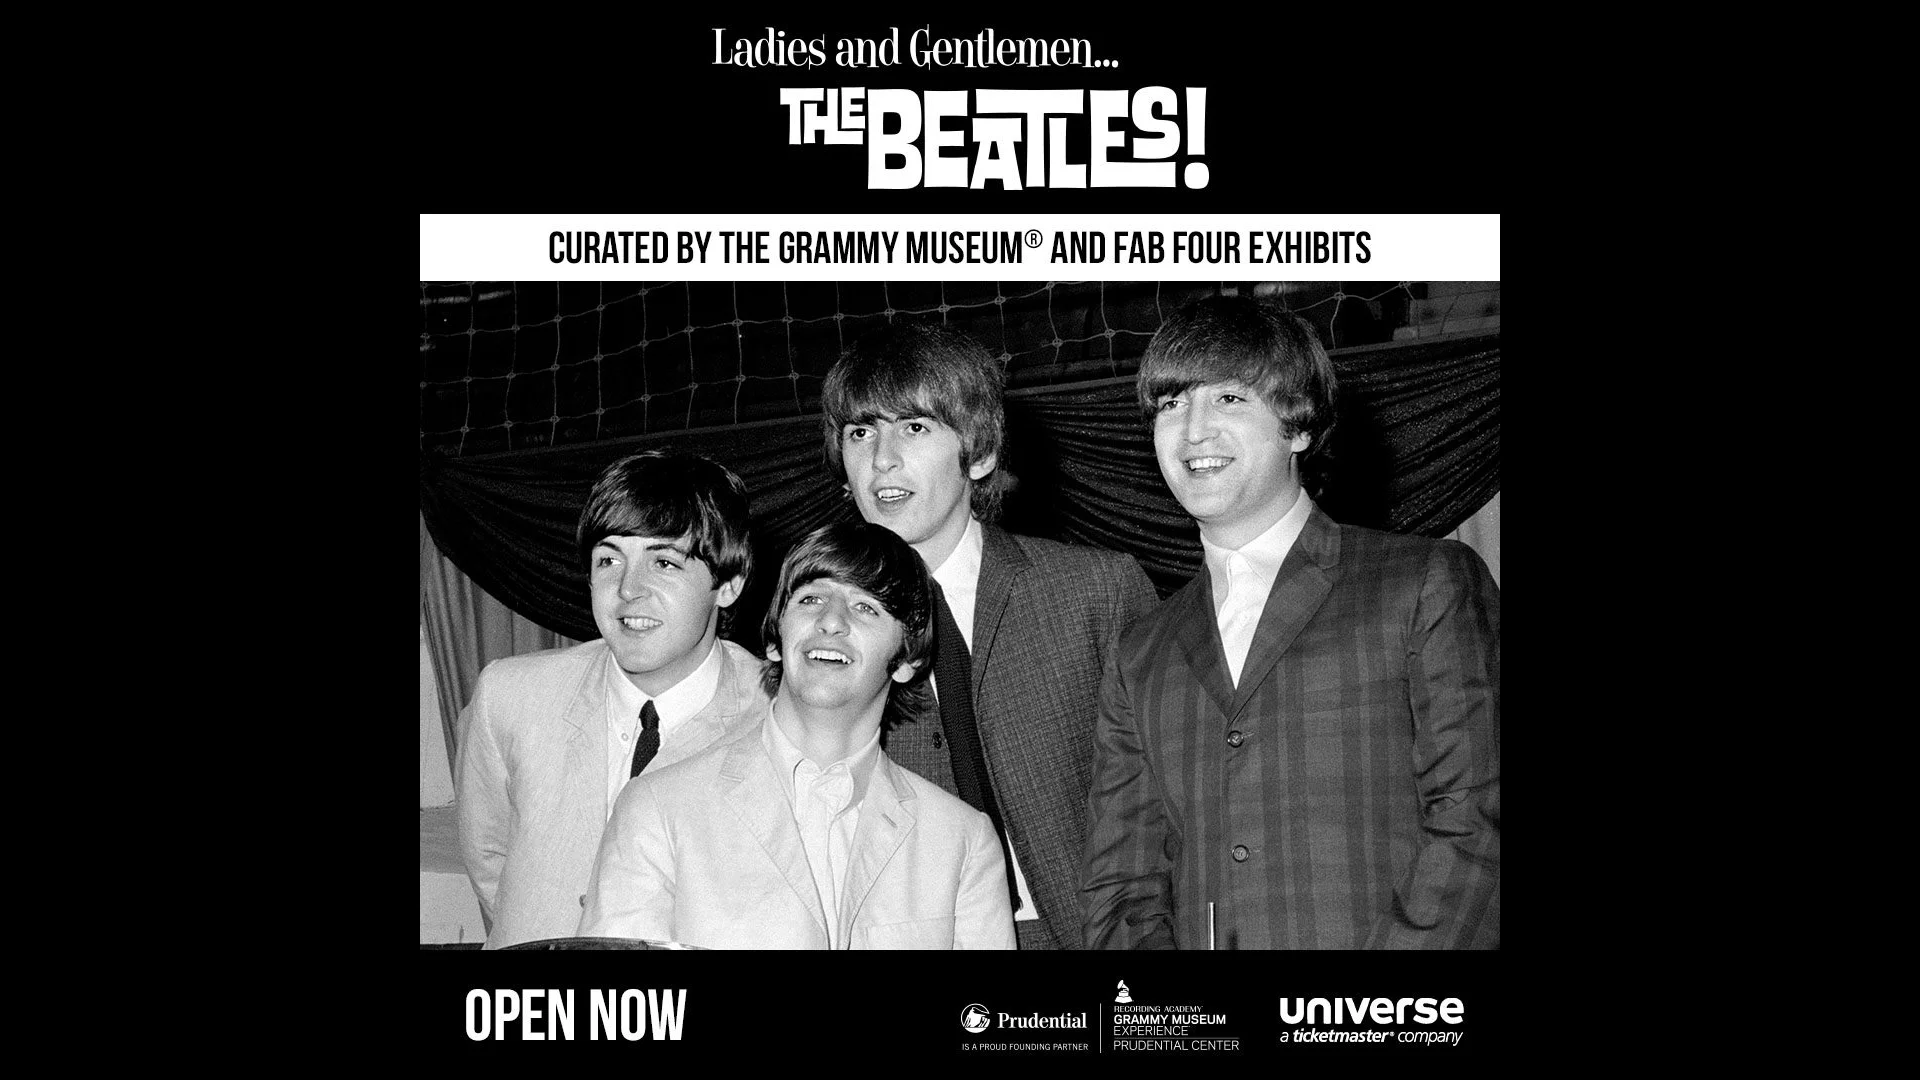 Ladies & Gentlemen... The Beatles - An exhibit curated by the GRAMMY Museum and Fab Four Exhibits